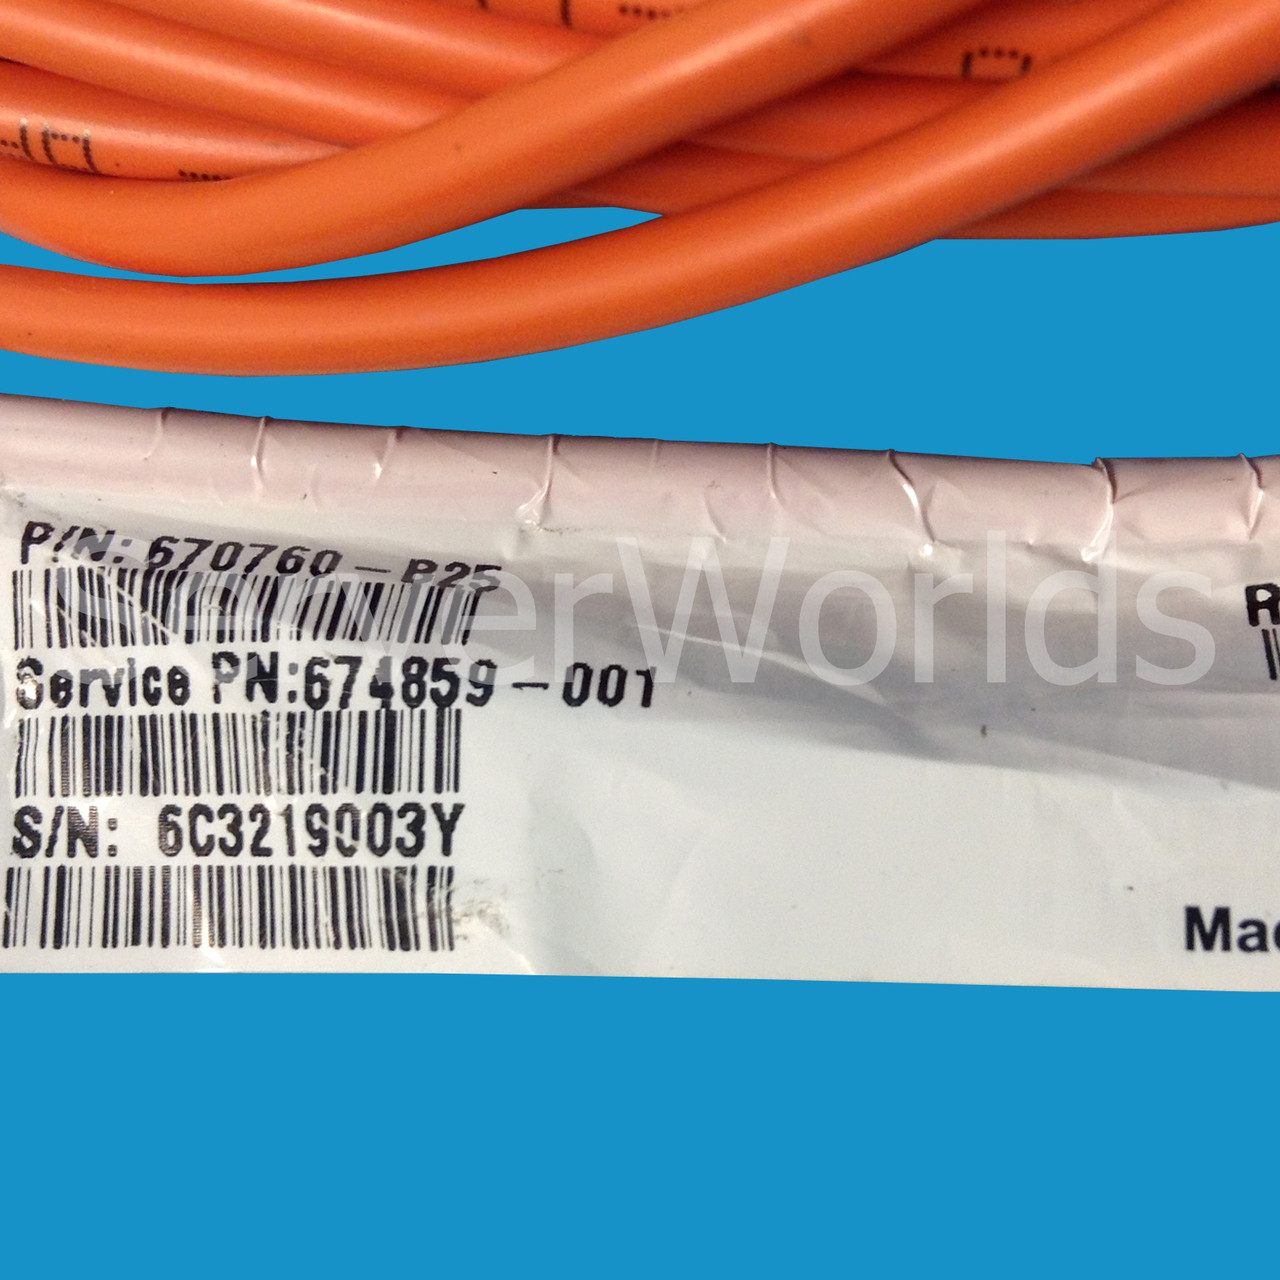 HP 670760-B25 12M Infiniband Optical Cable Active FC 674859-001